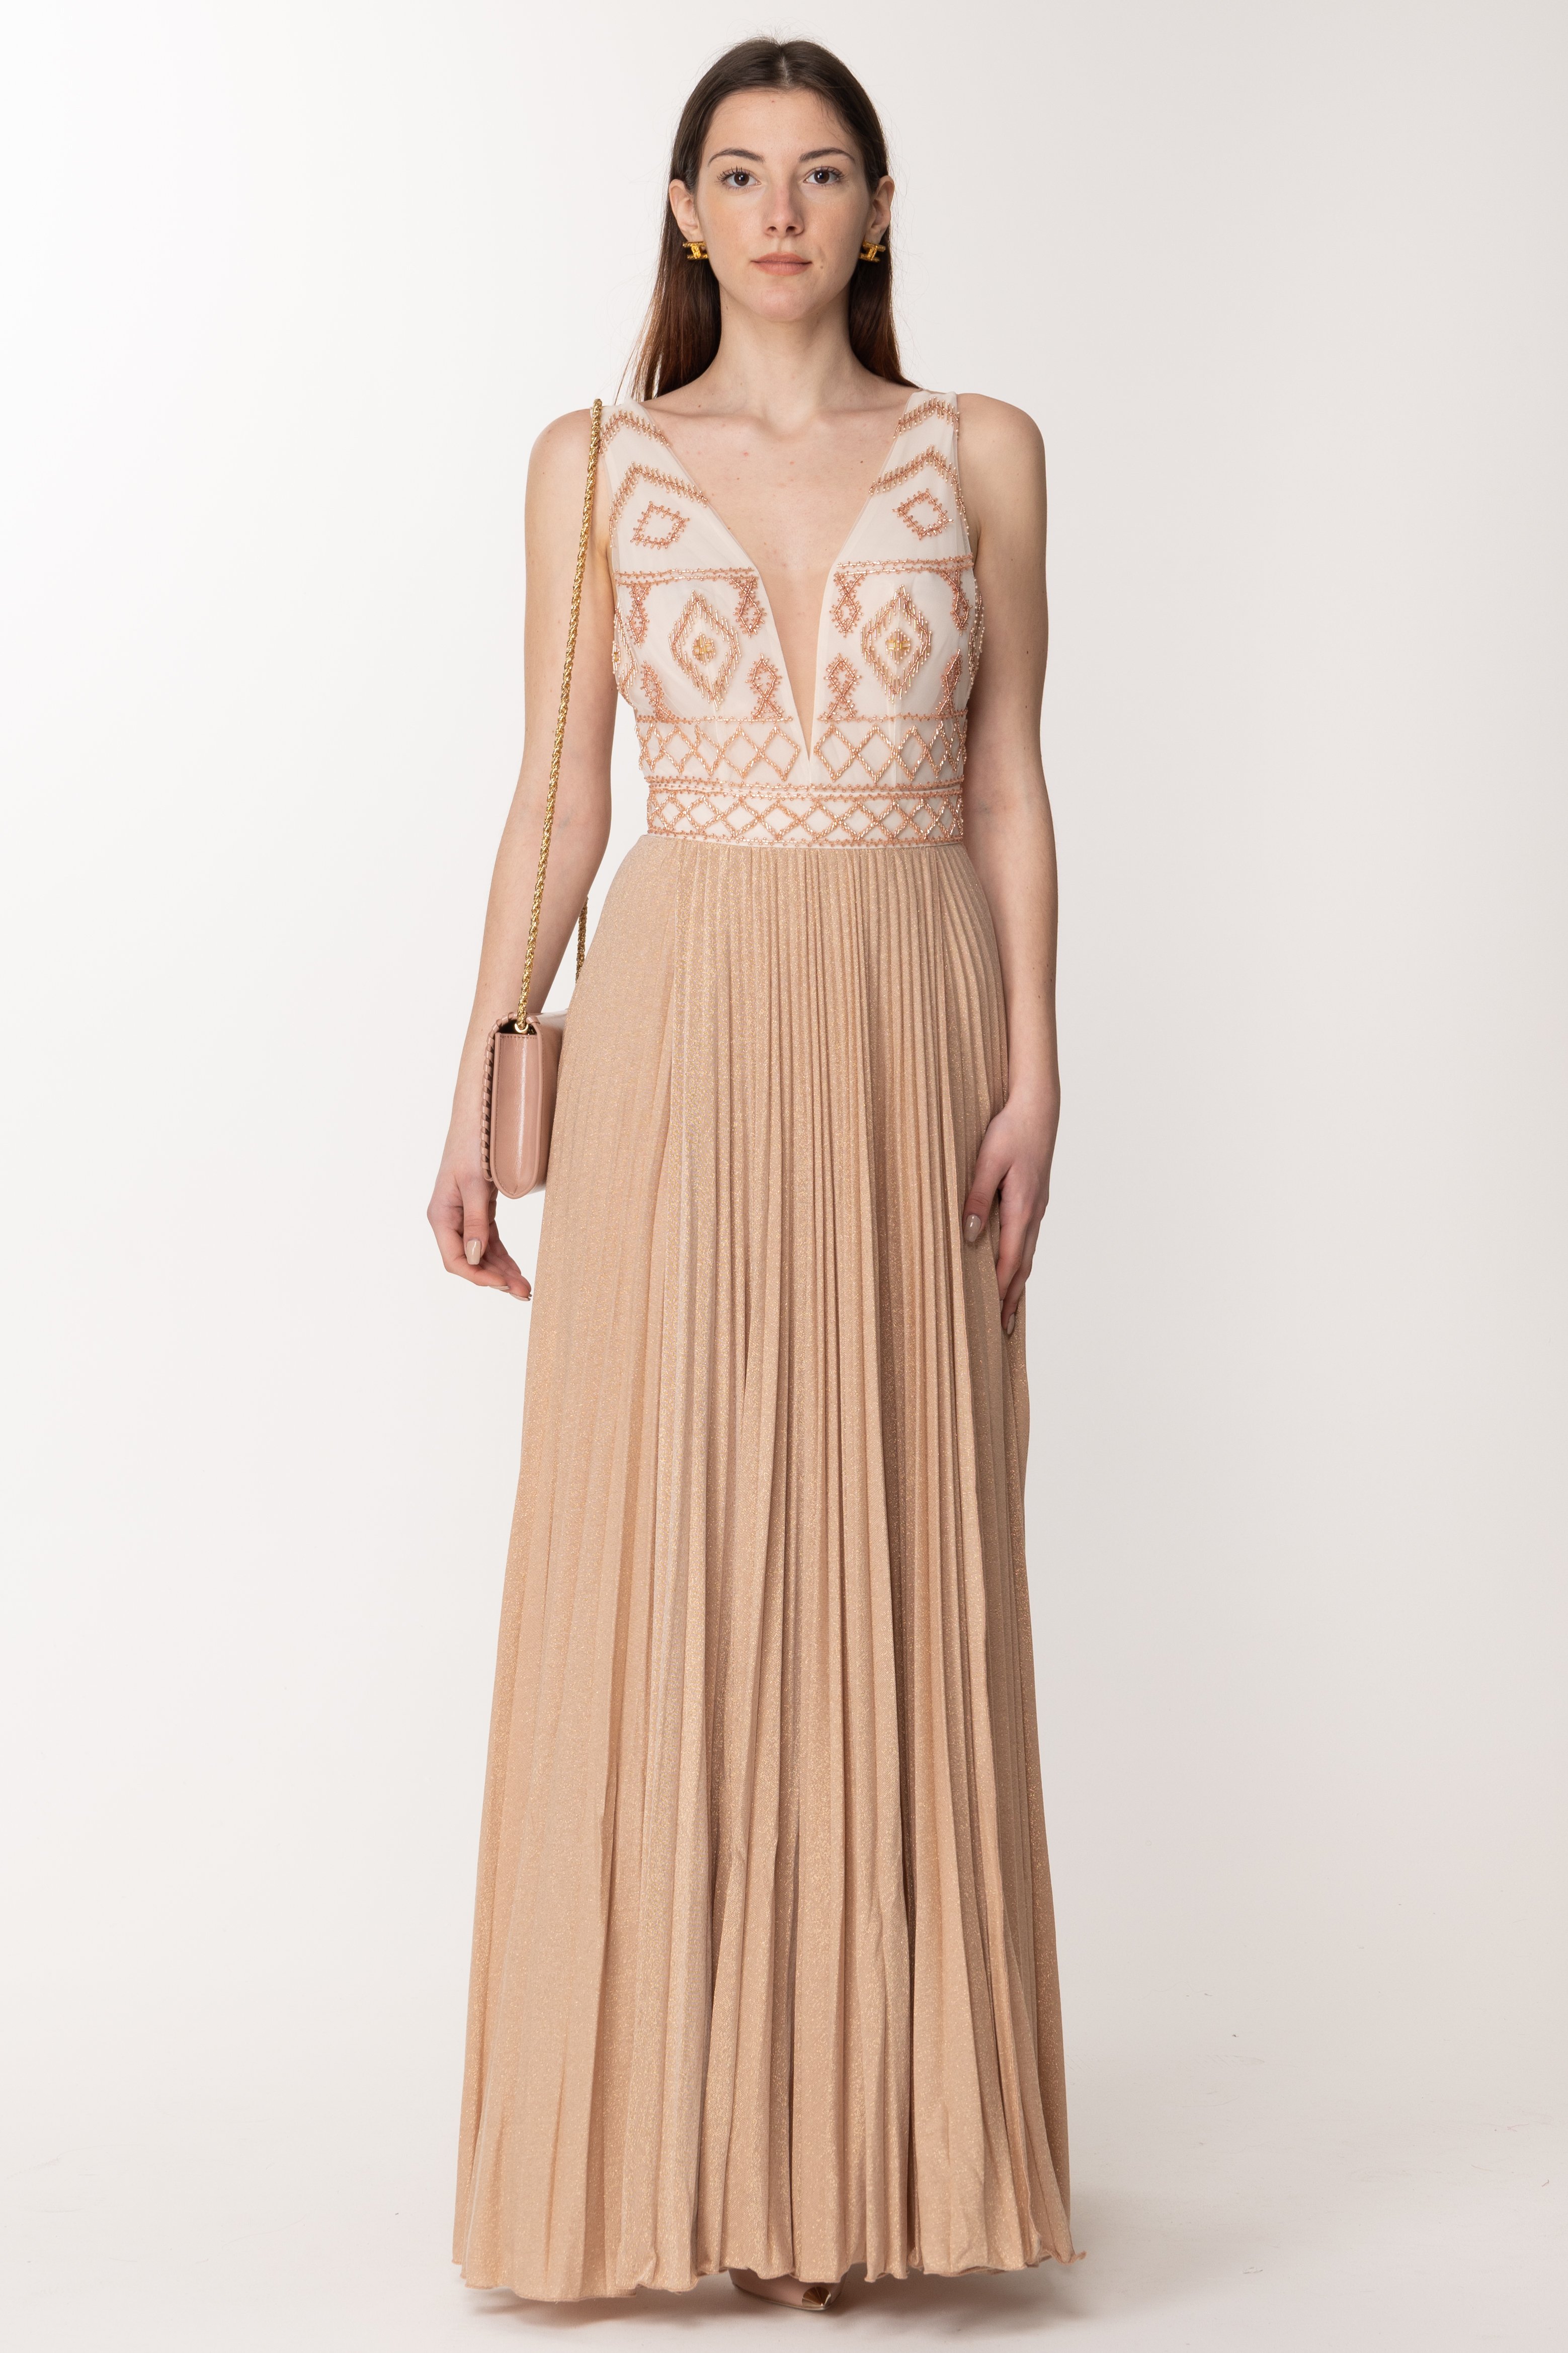 Preview: Elisabetta Franchi Red Carpet dress with embroidered bodice Burro/Carne